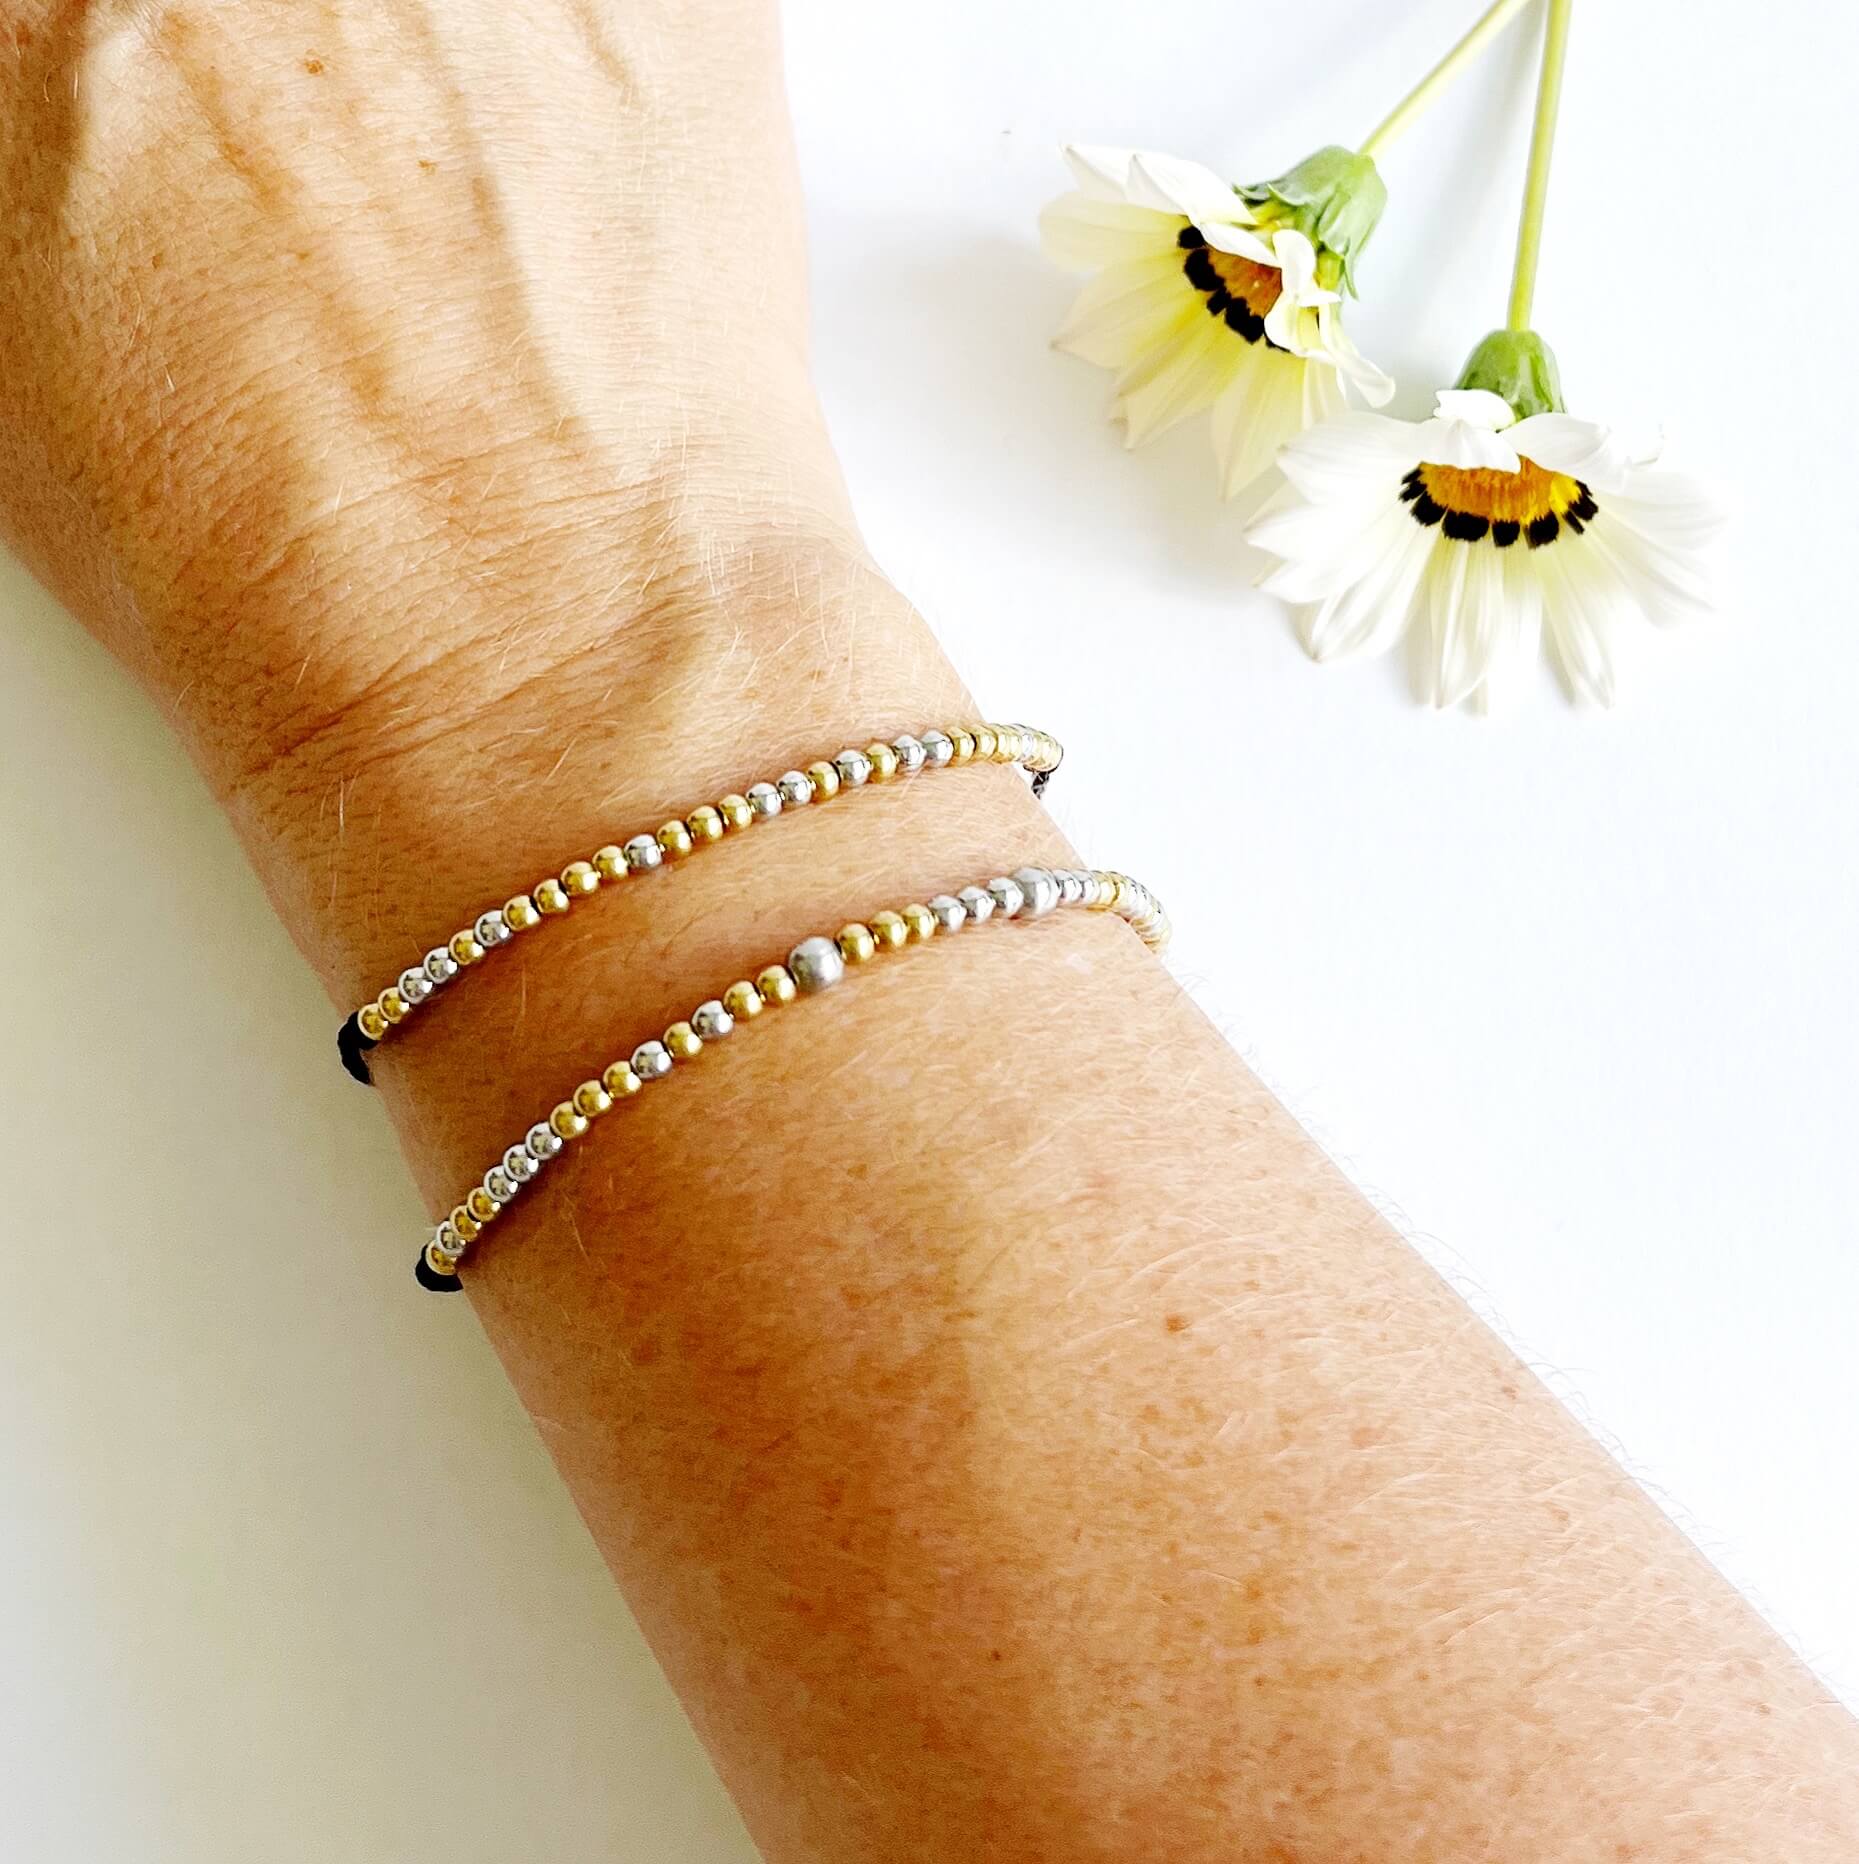 Morse code bracelets on a woman's wrist - unbreakable and loved so much